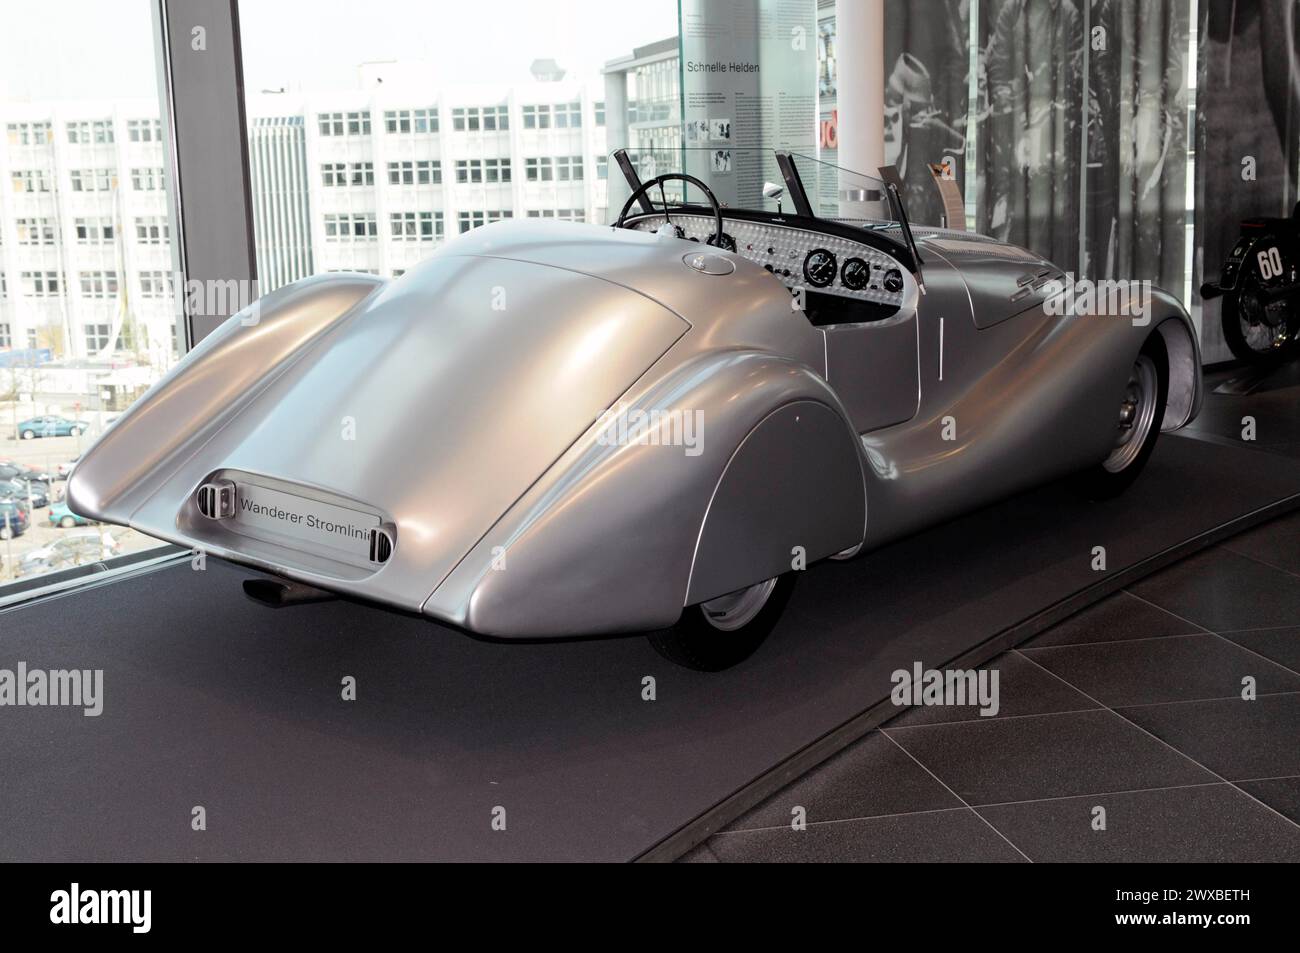 Museum mobile, Audi Museum, A silver roadster with aerodynamic design presented in an exhibition, Museum mobile, Audi Museum, Audi, Ingolstadt Stock Photo